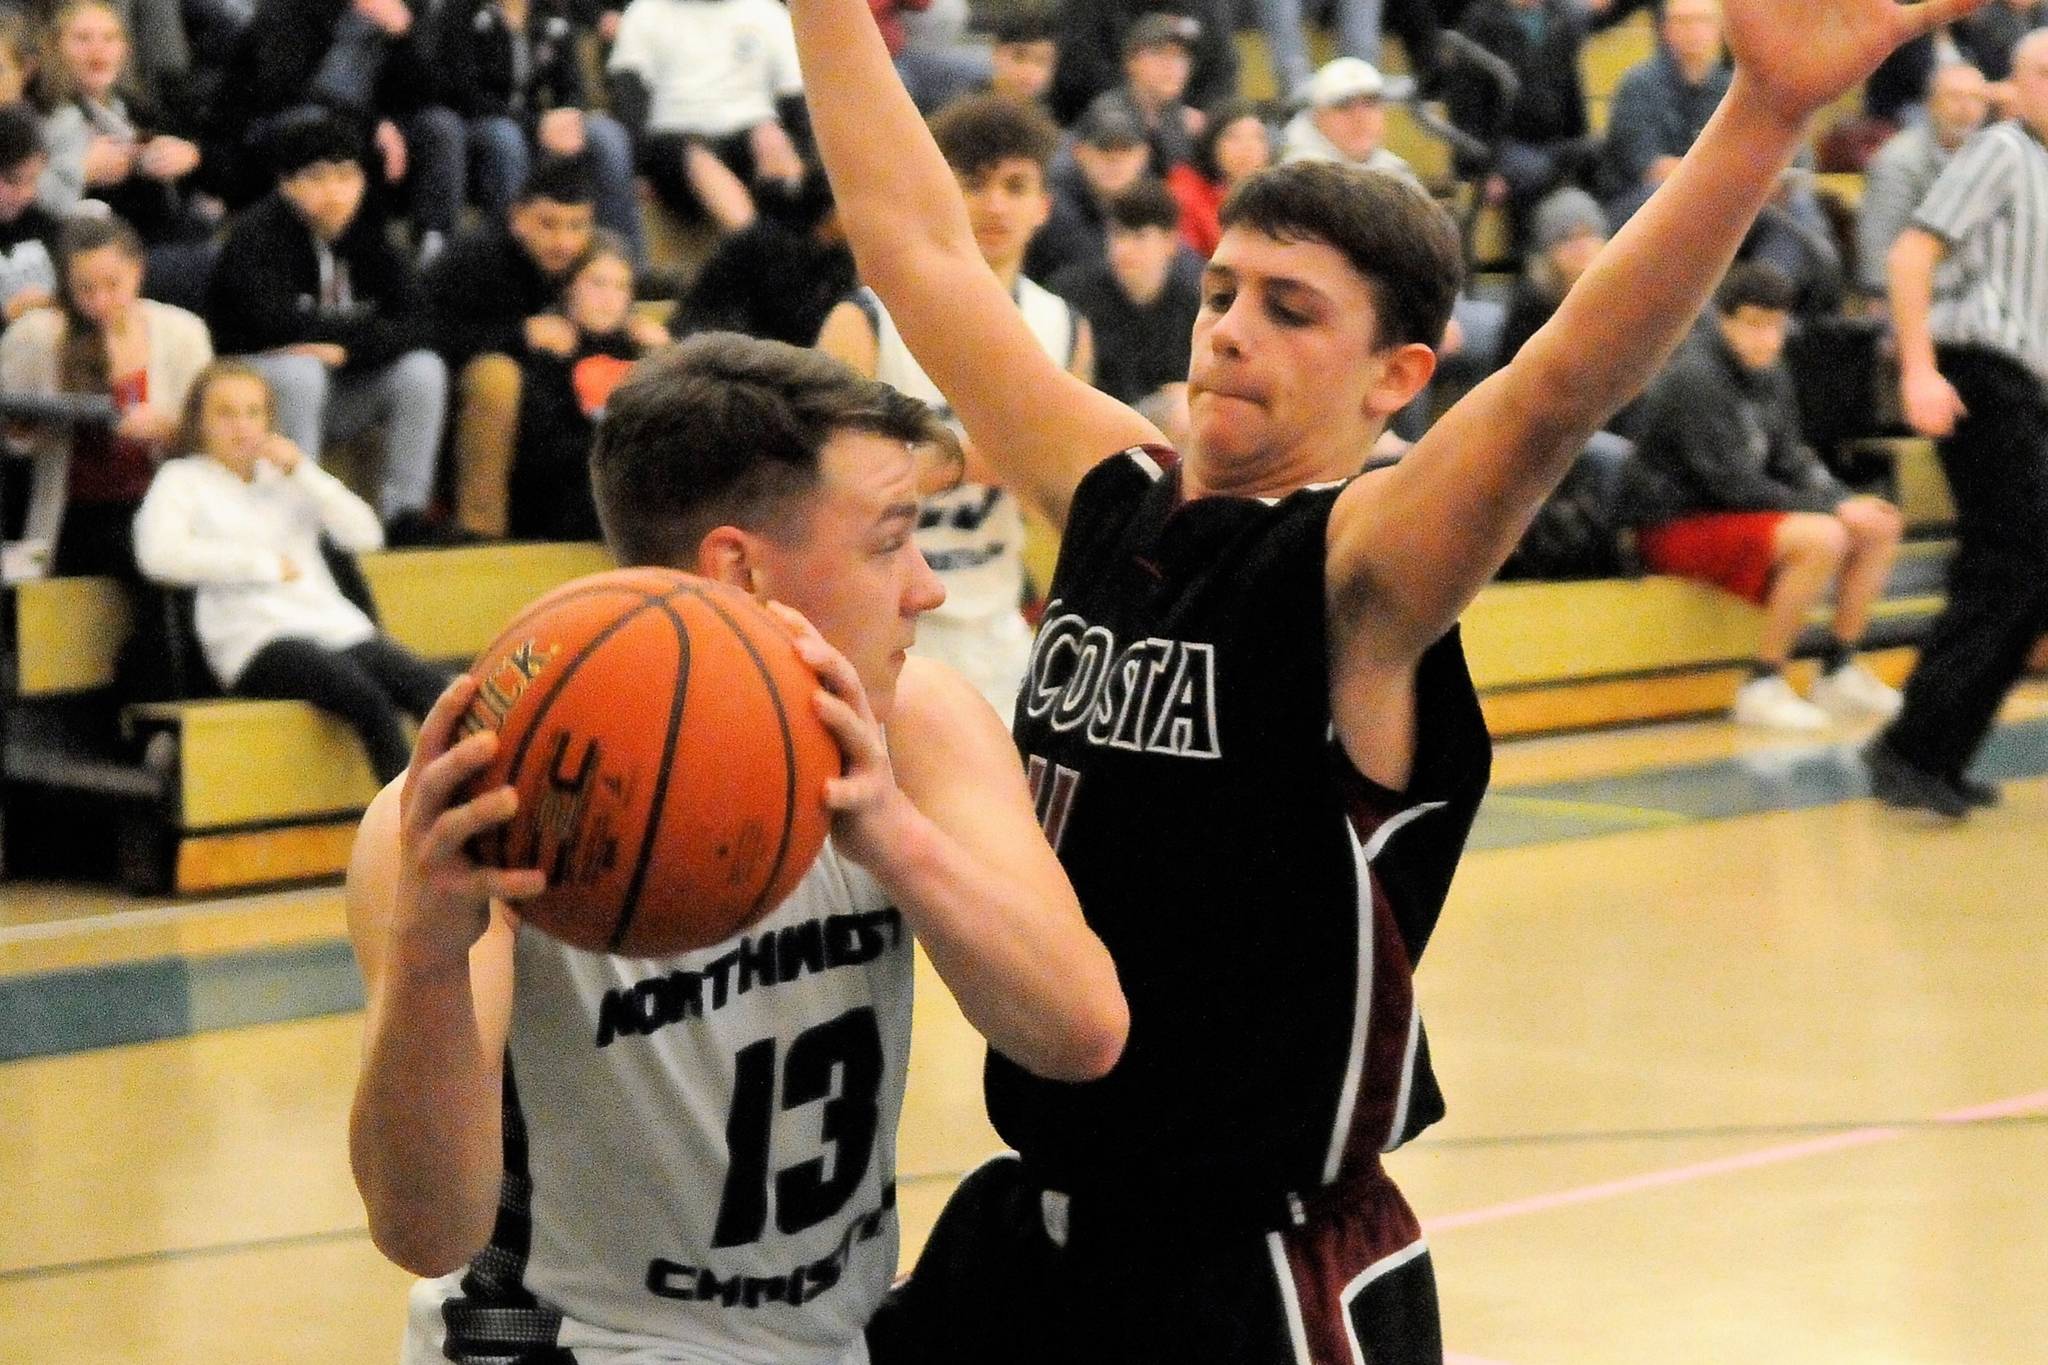 Saturday Prep Basketball Roundup: Ocosta can’t get over the hump against Northwest Christian